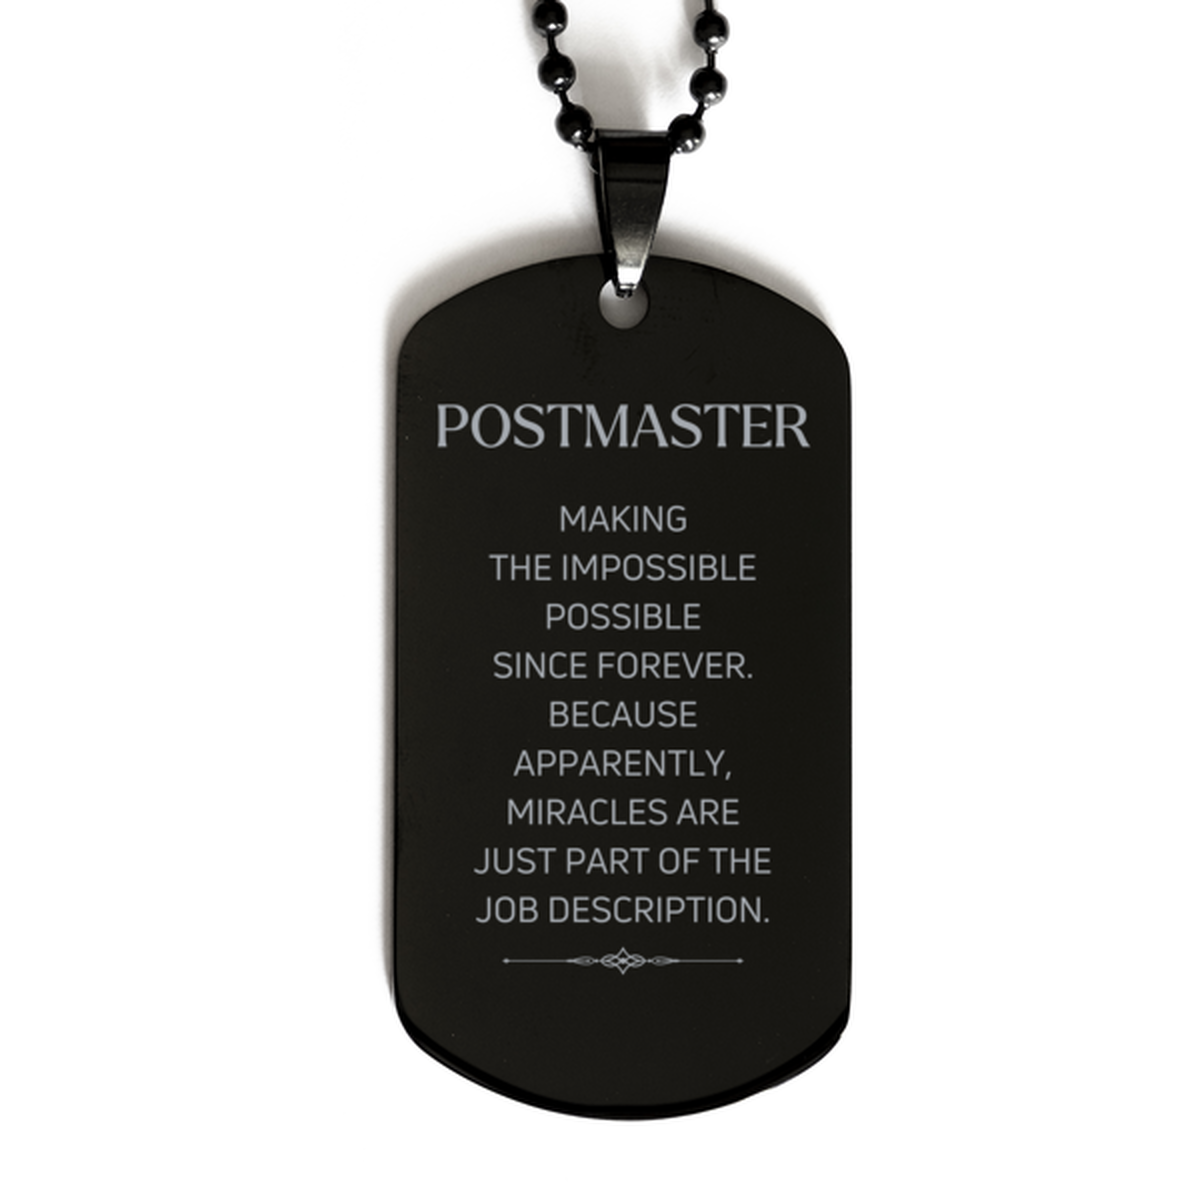 Funny Postmaster Gifts, Miracles are just part of the job description, Inspirational Birthday Black Dog Tag For Postmaster, Men, Women, Coworkers, Friends, Boss